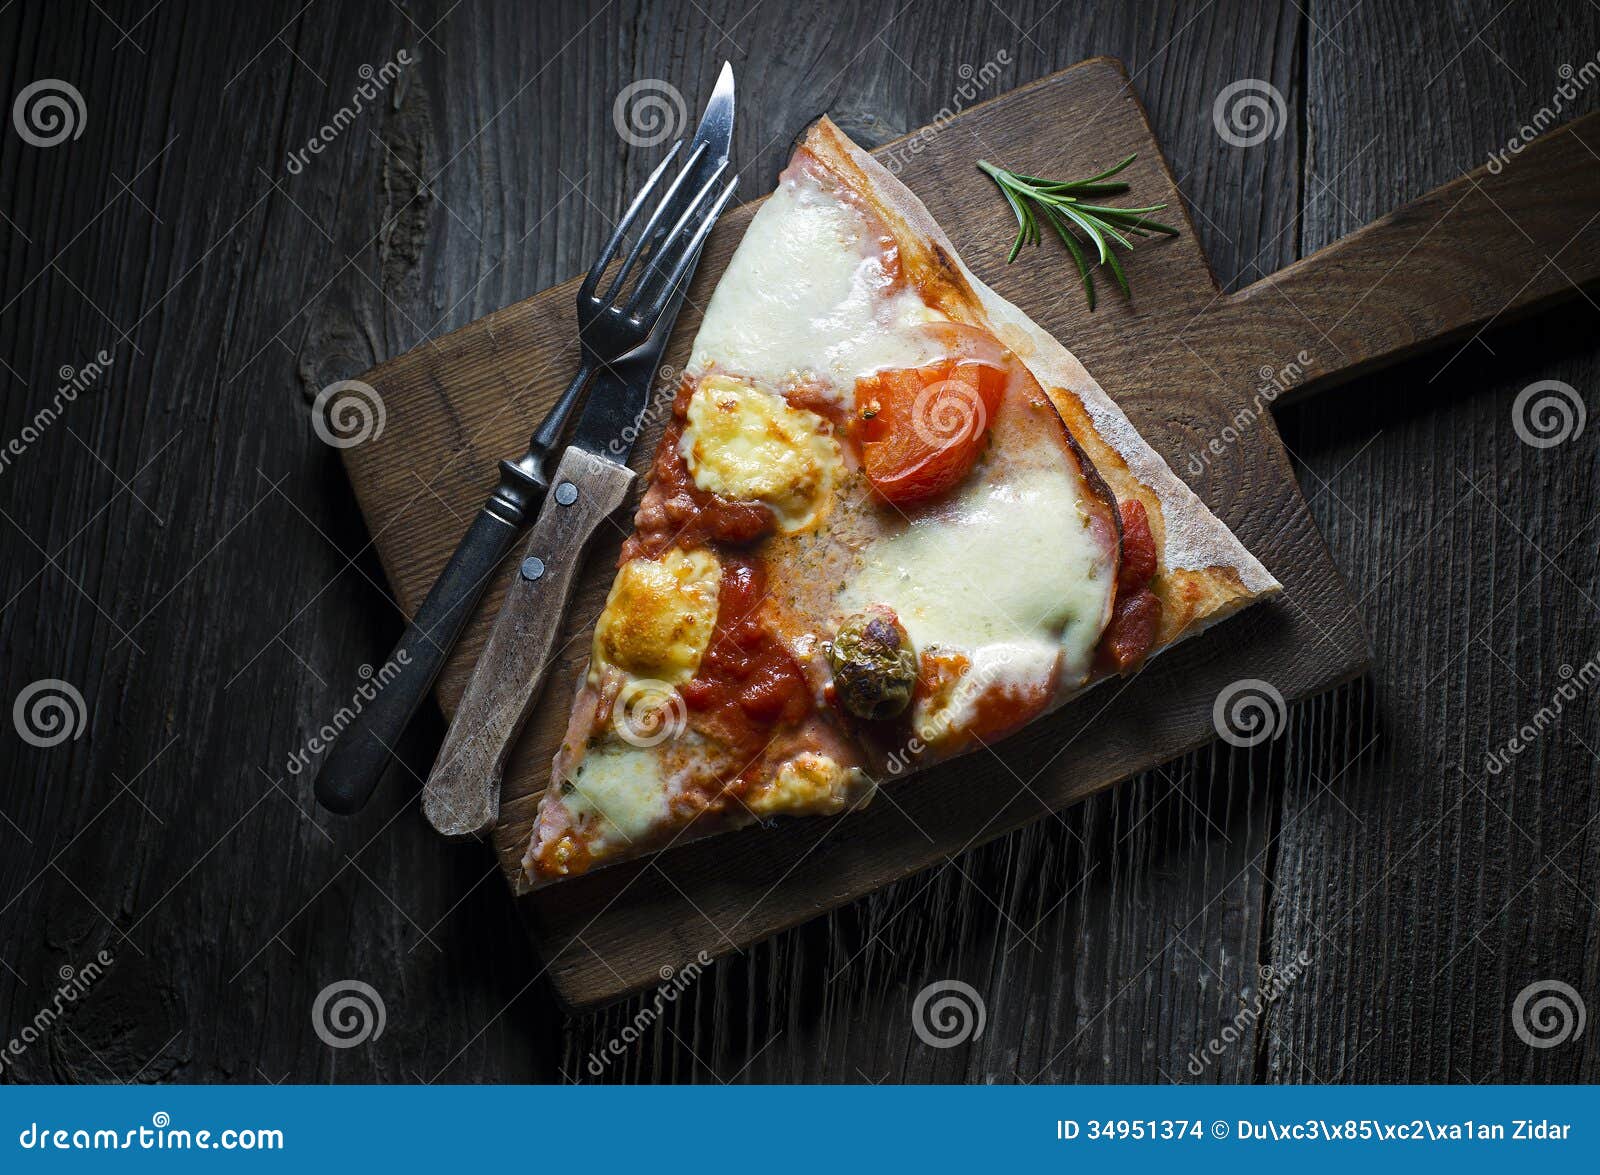 Pizza stock photo. Image of knife, served, wood, table - 34951374